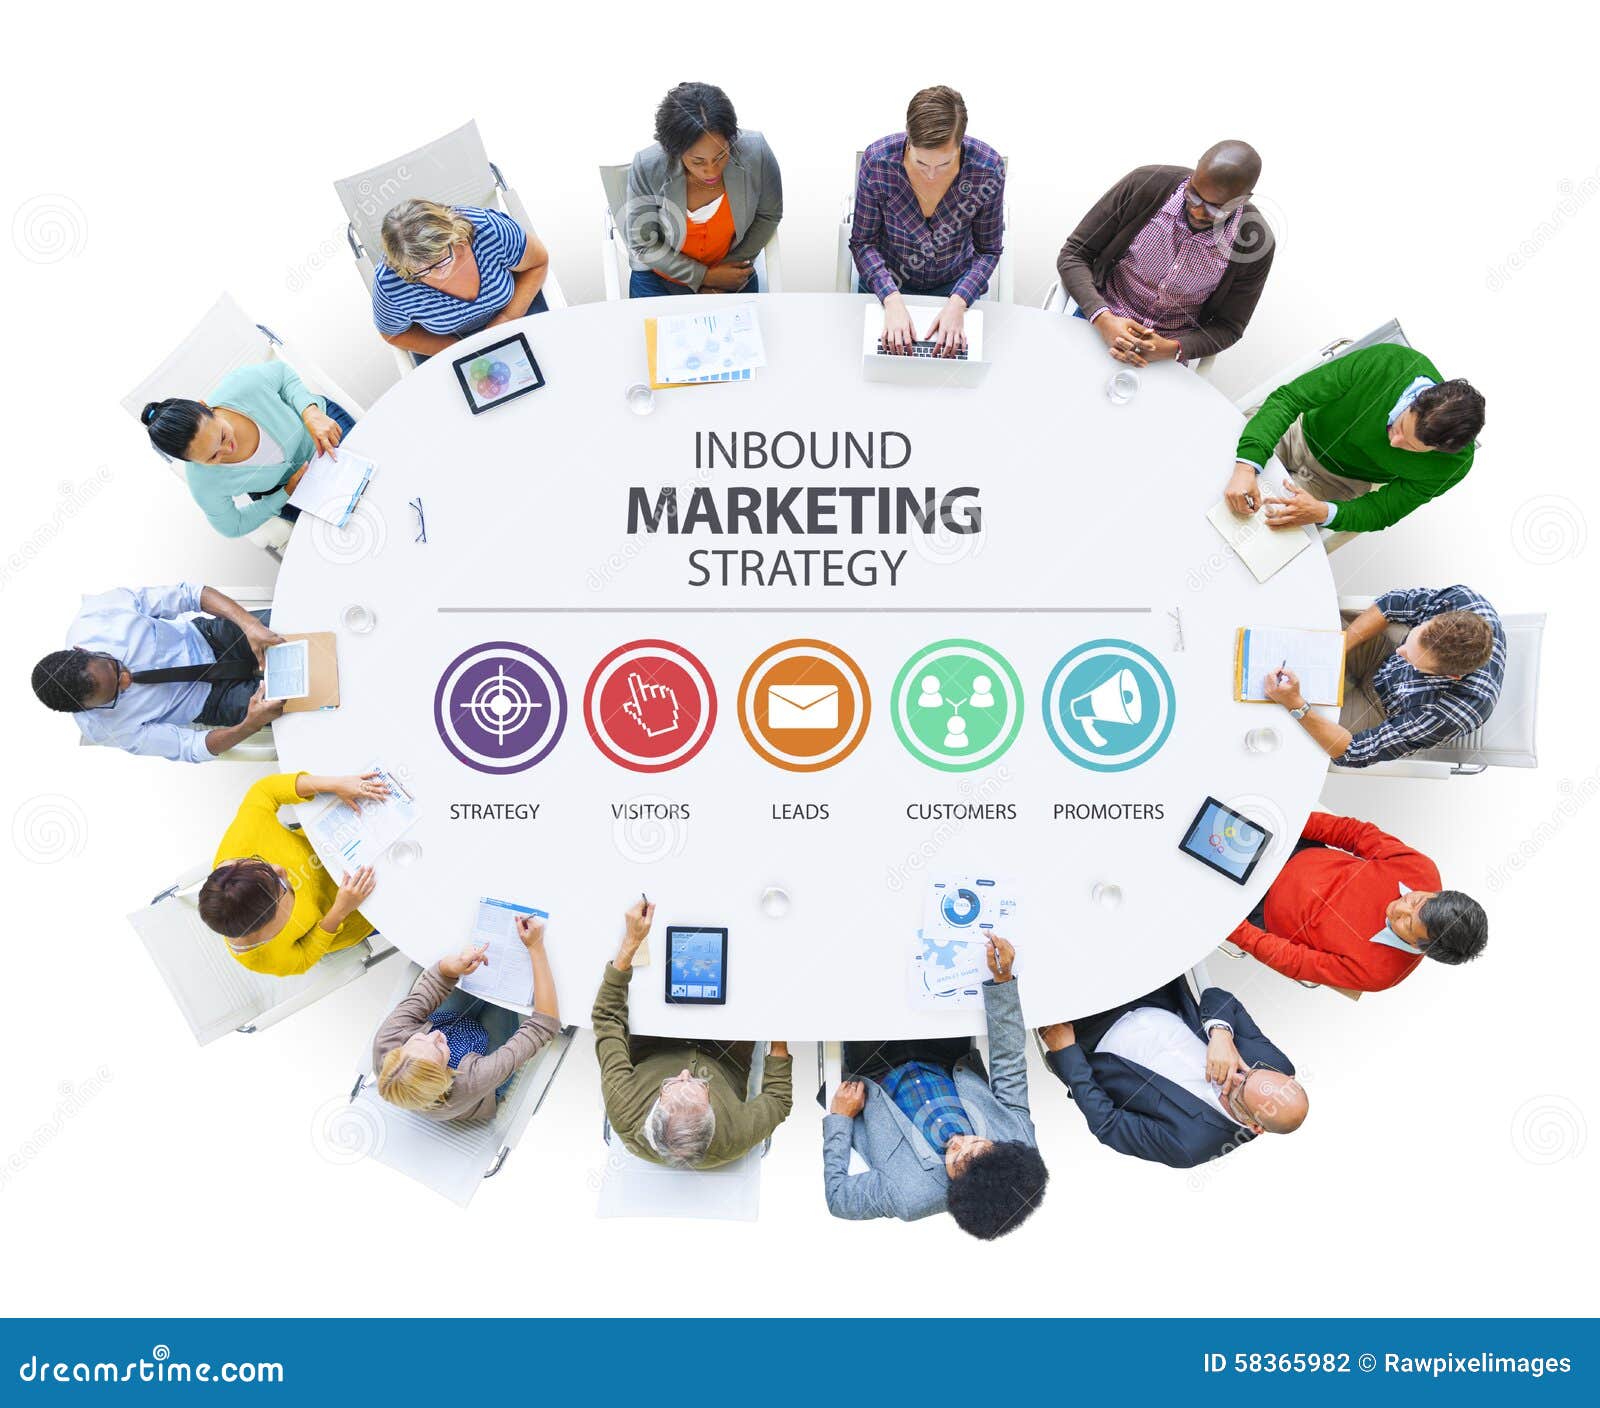 inbound marketing strategy advertisement commercial branding co